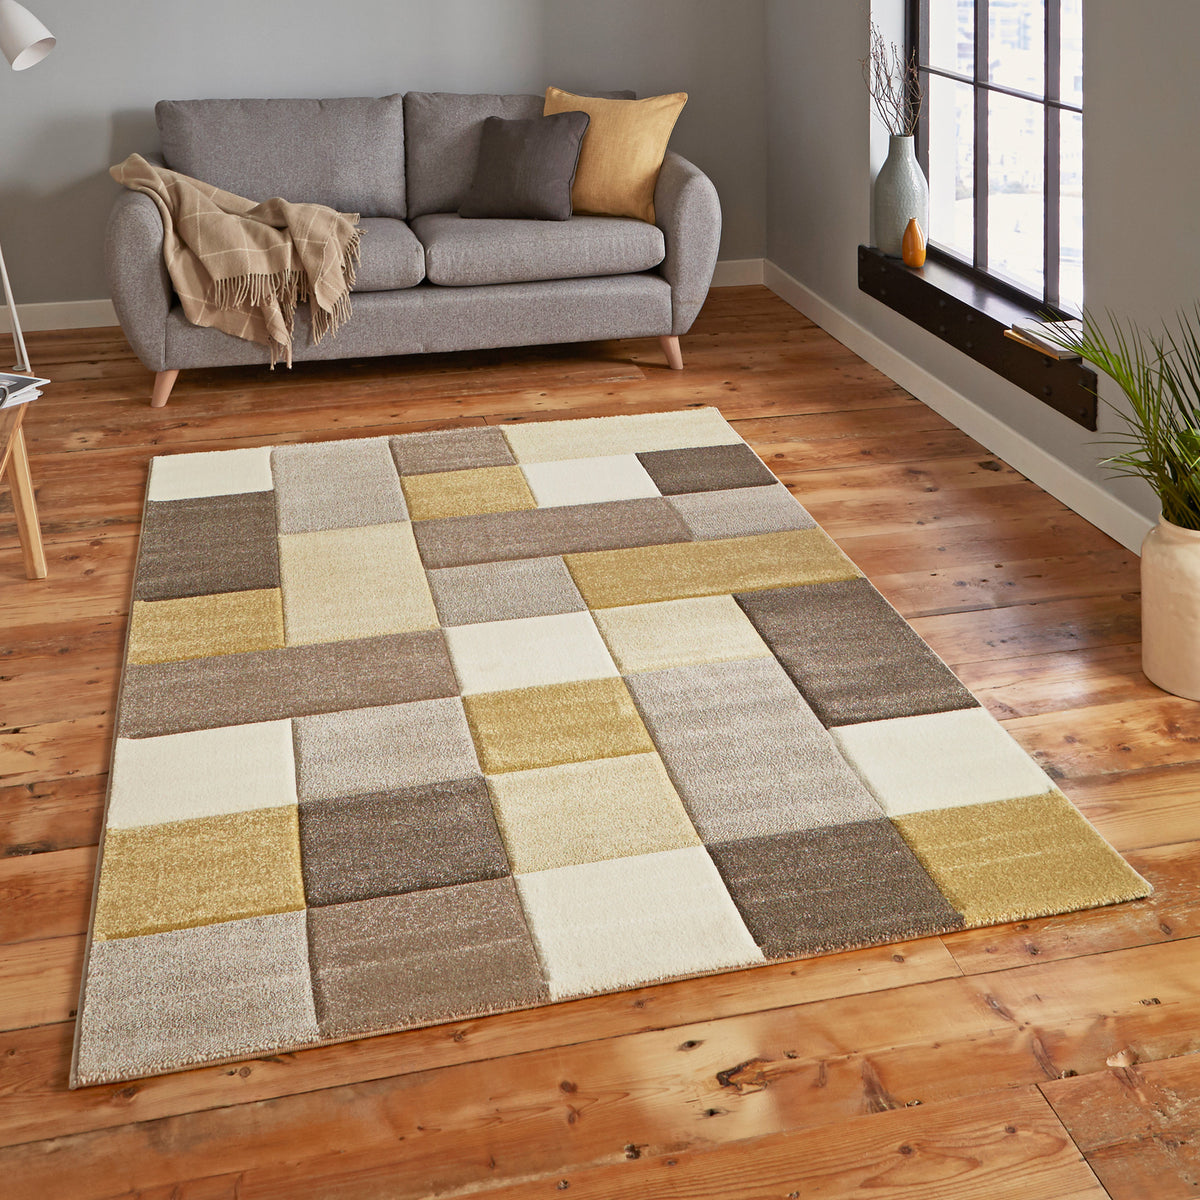 Brockton Yellow Beige Square Patterned Hand Carved Rug for living room